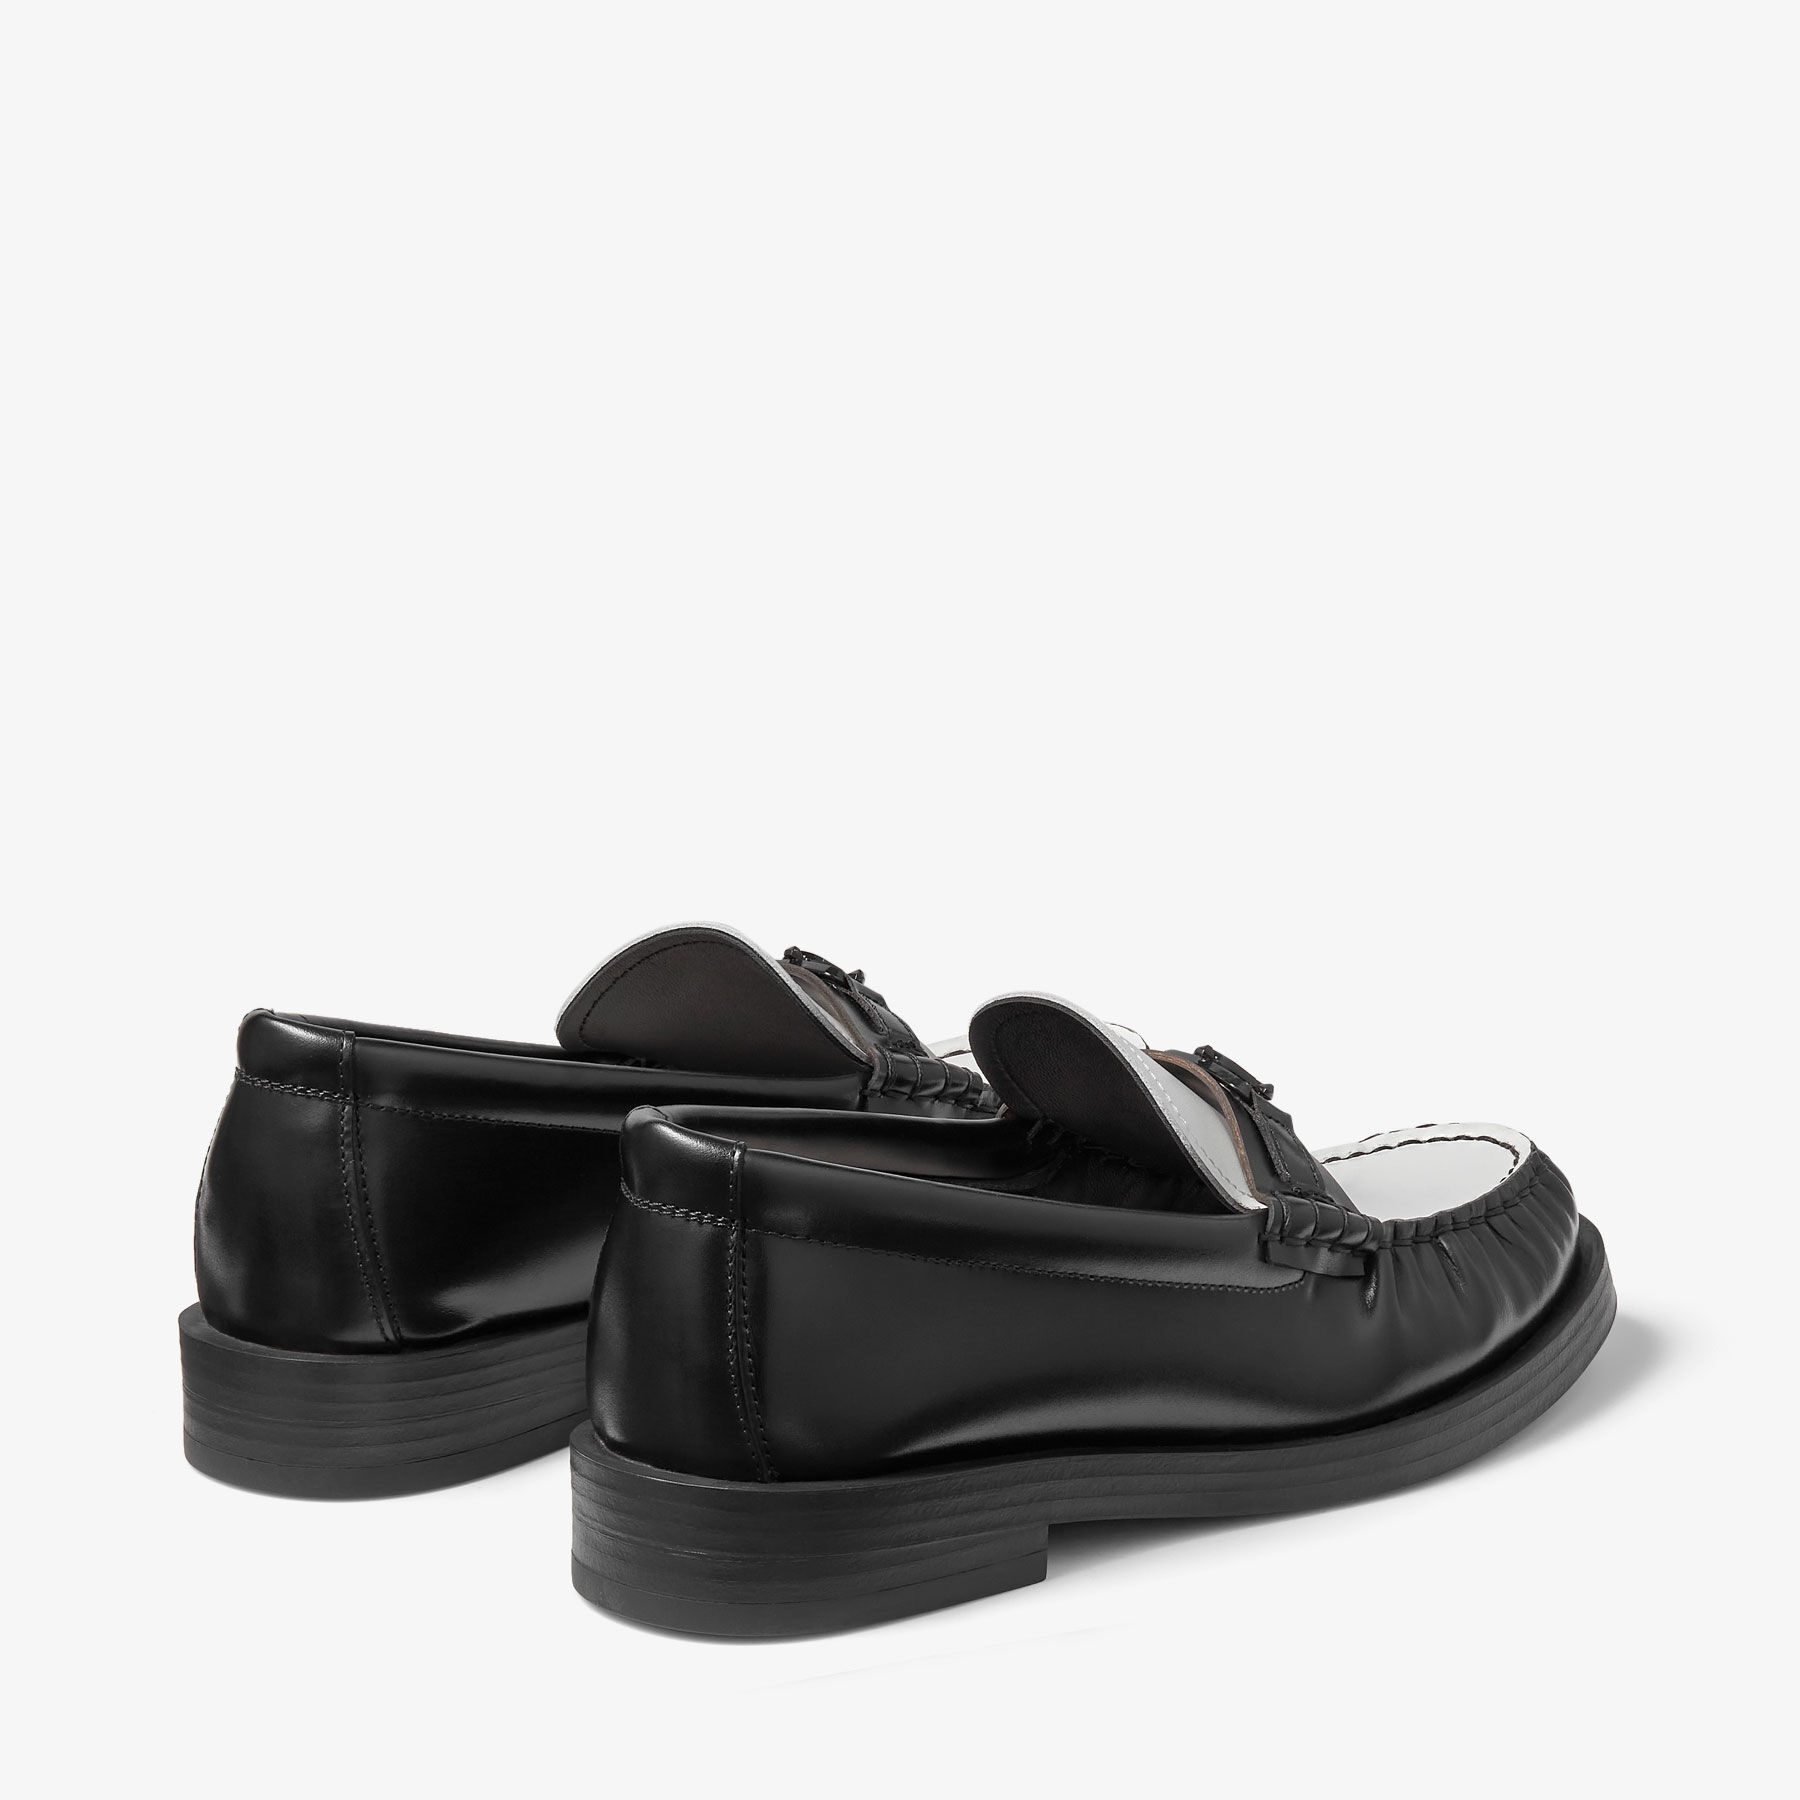 Addie/JC
Black and Latte Box Calf Leather Flat Loafers with JC Emblem - 5